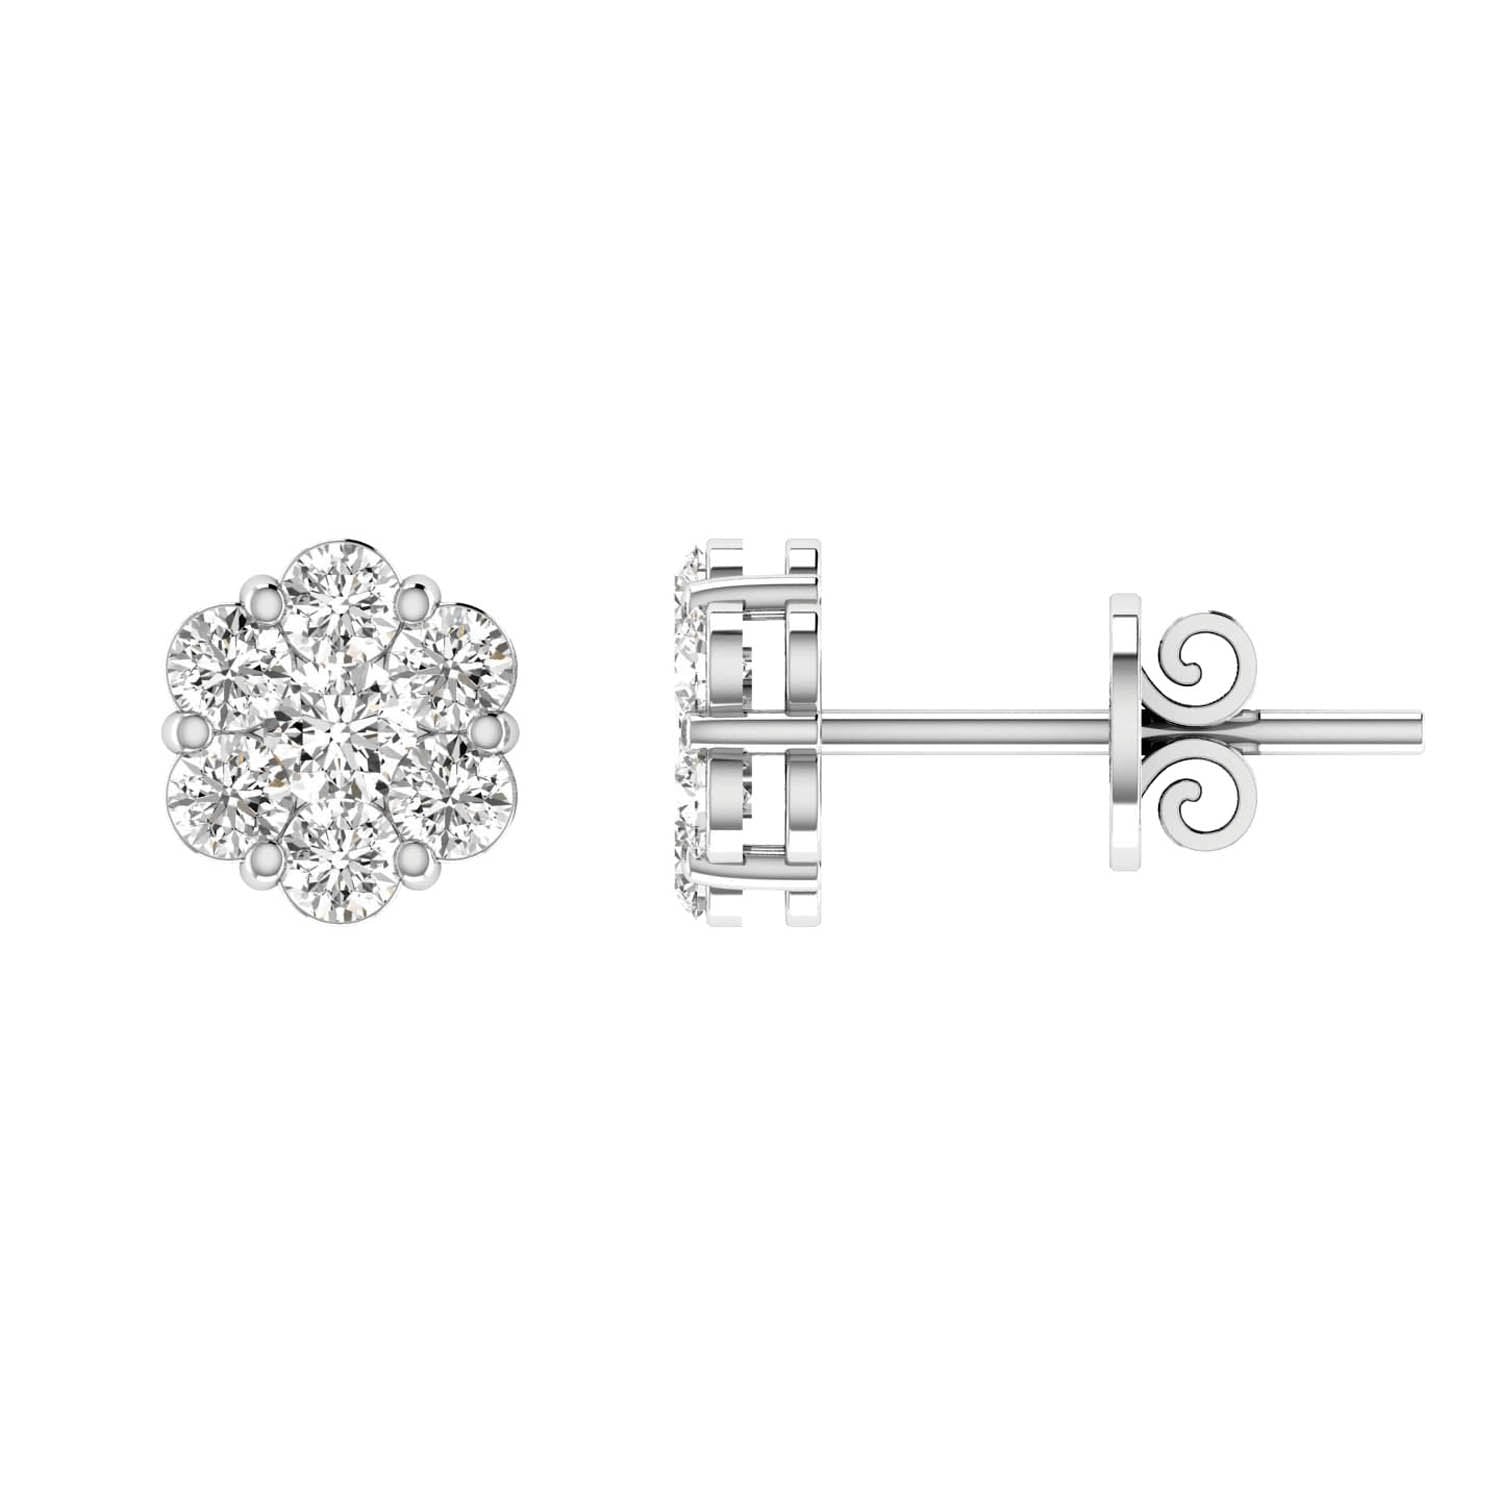 Cluster Stud Diamond Earrings with 0.75ct Diamonds in 9K White Gold - RJ9WECLUS75GH